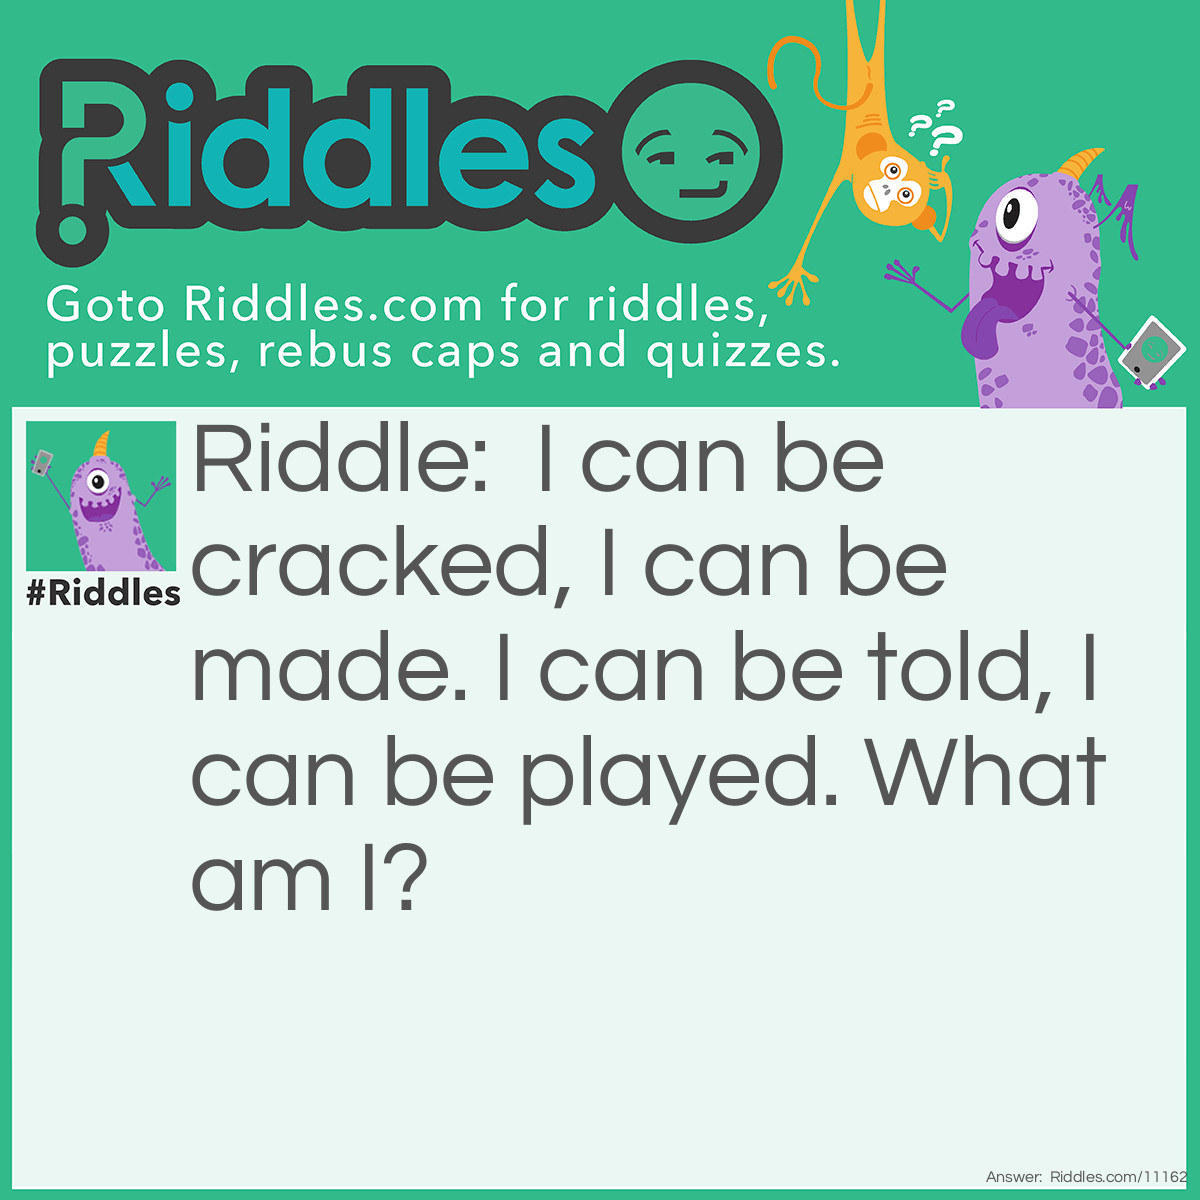 Riddle: I can be cracked, I can be made. I can be told, I can be played. What am I? Answer: a joke